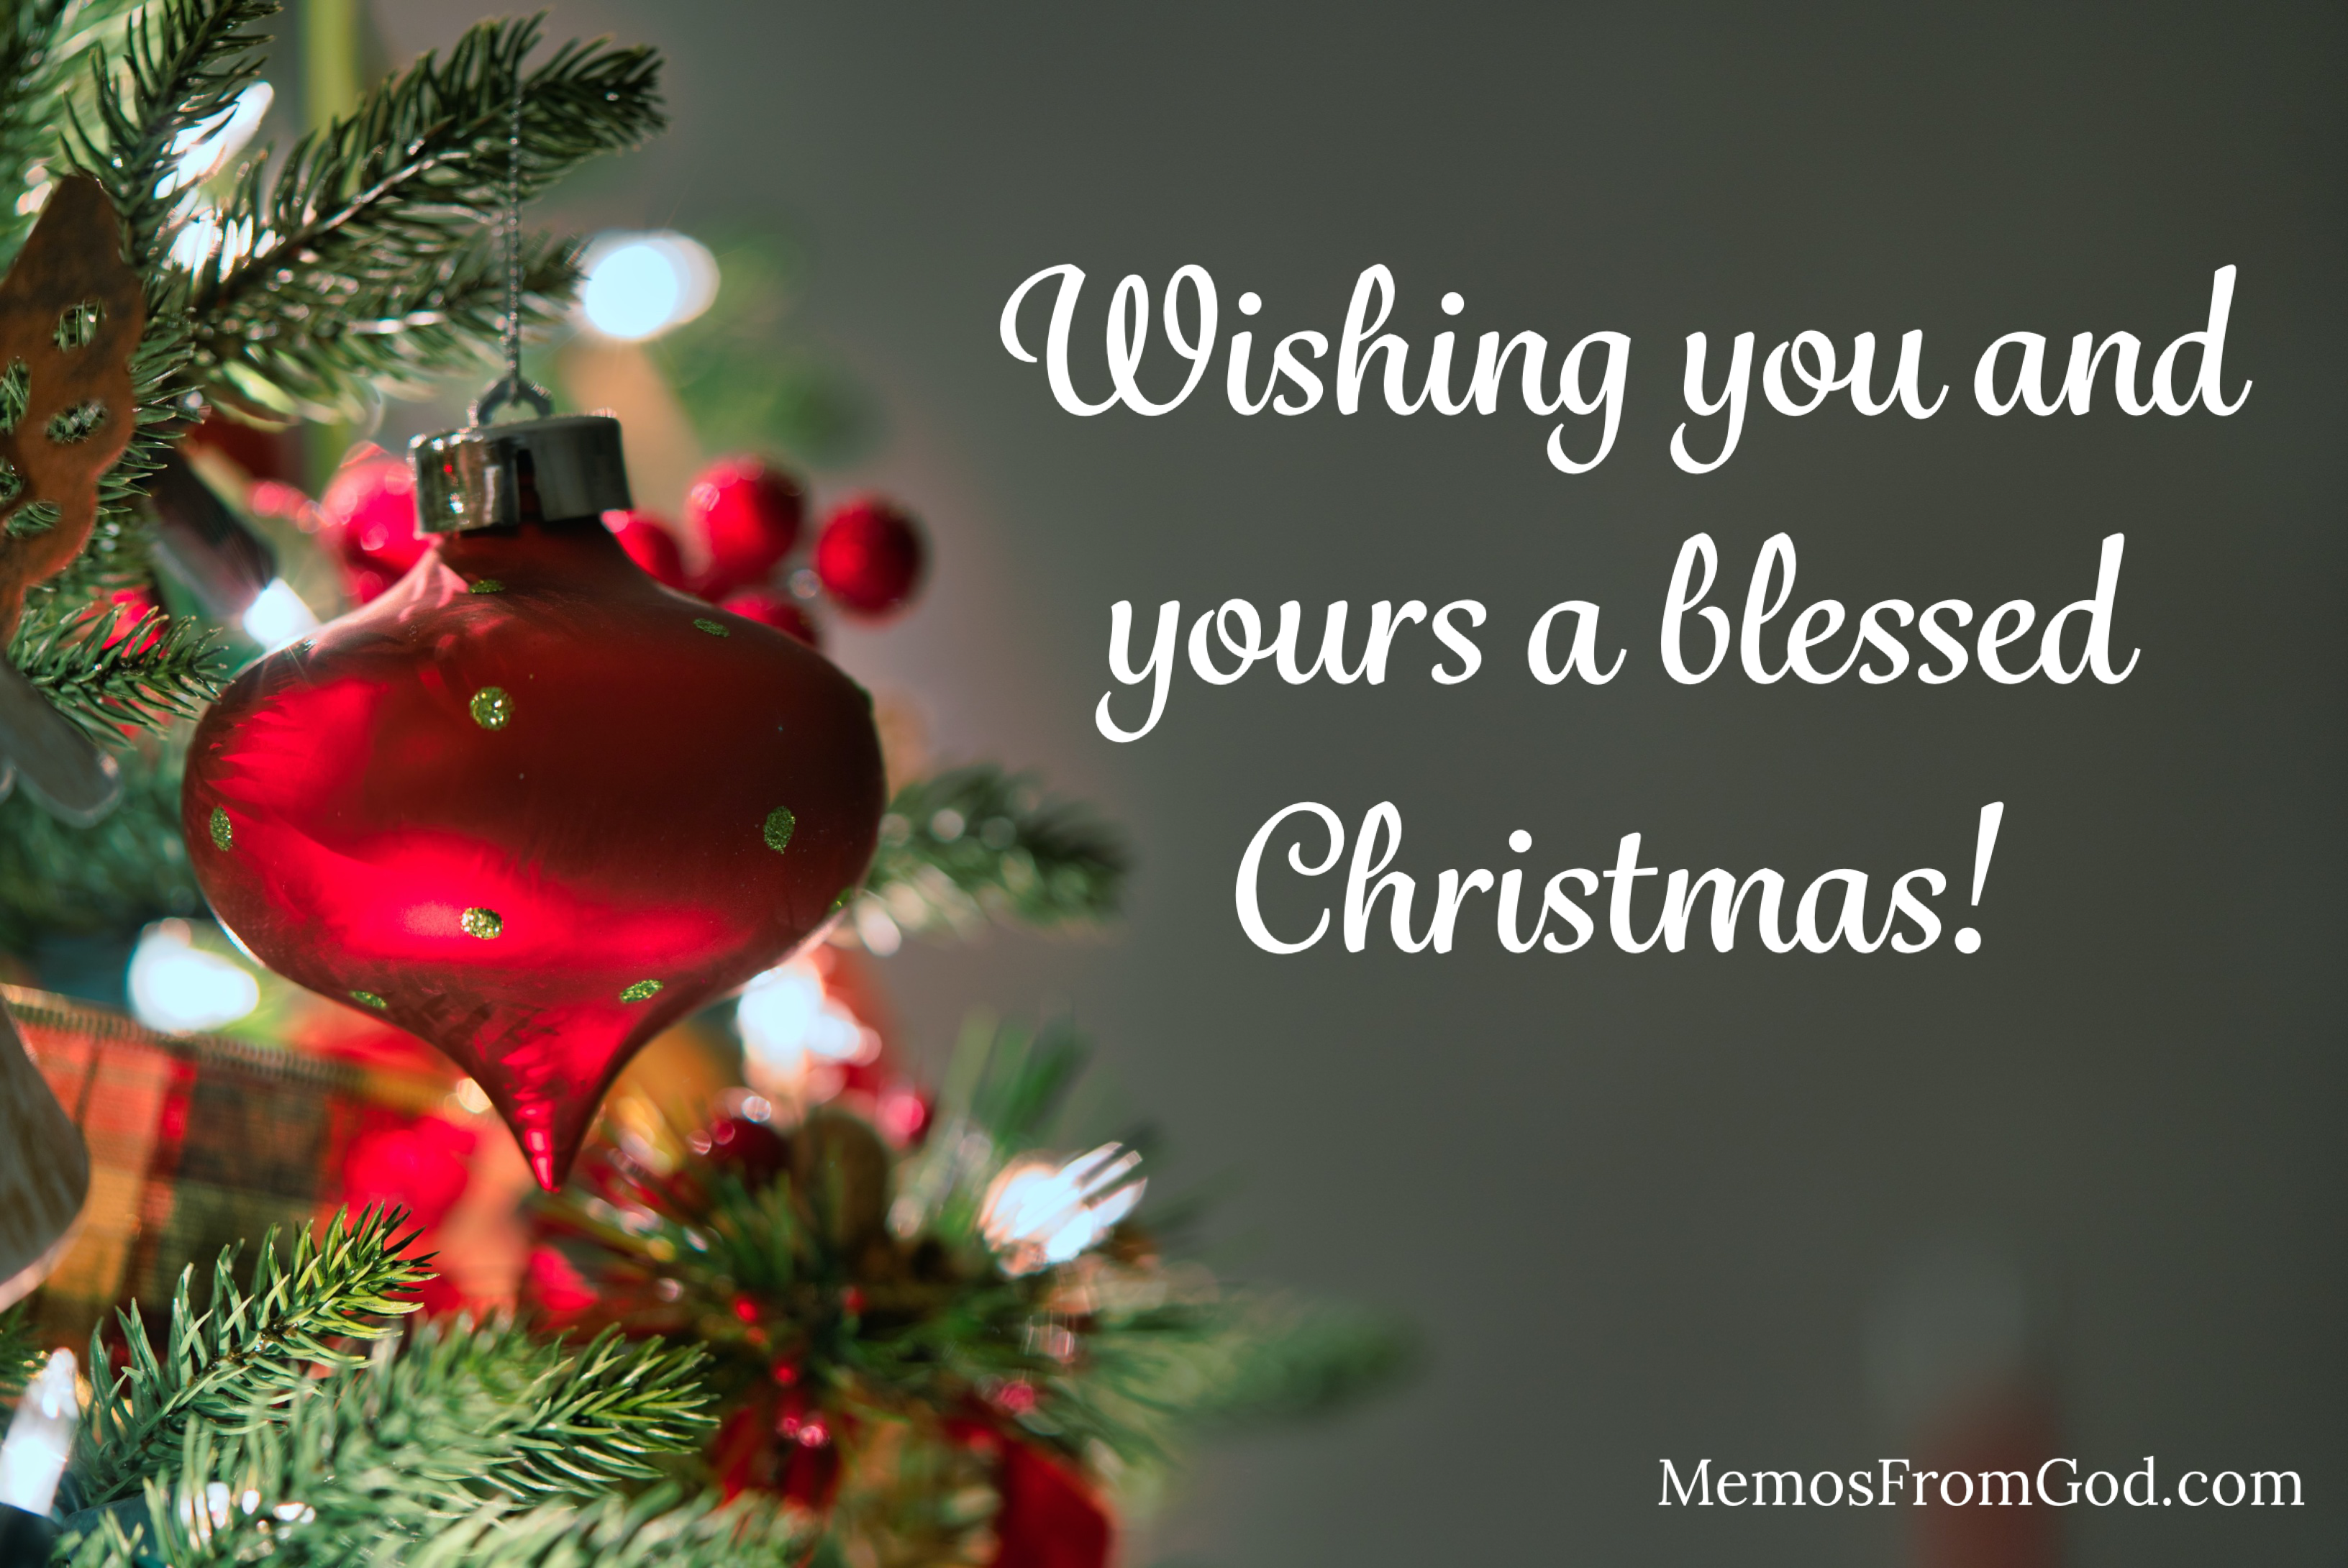 A red ornament hangs on the bough of a Christmas tree. Caption: Wishing you and yours a blessed Christmas!